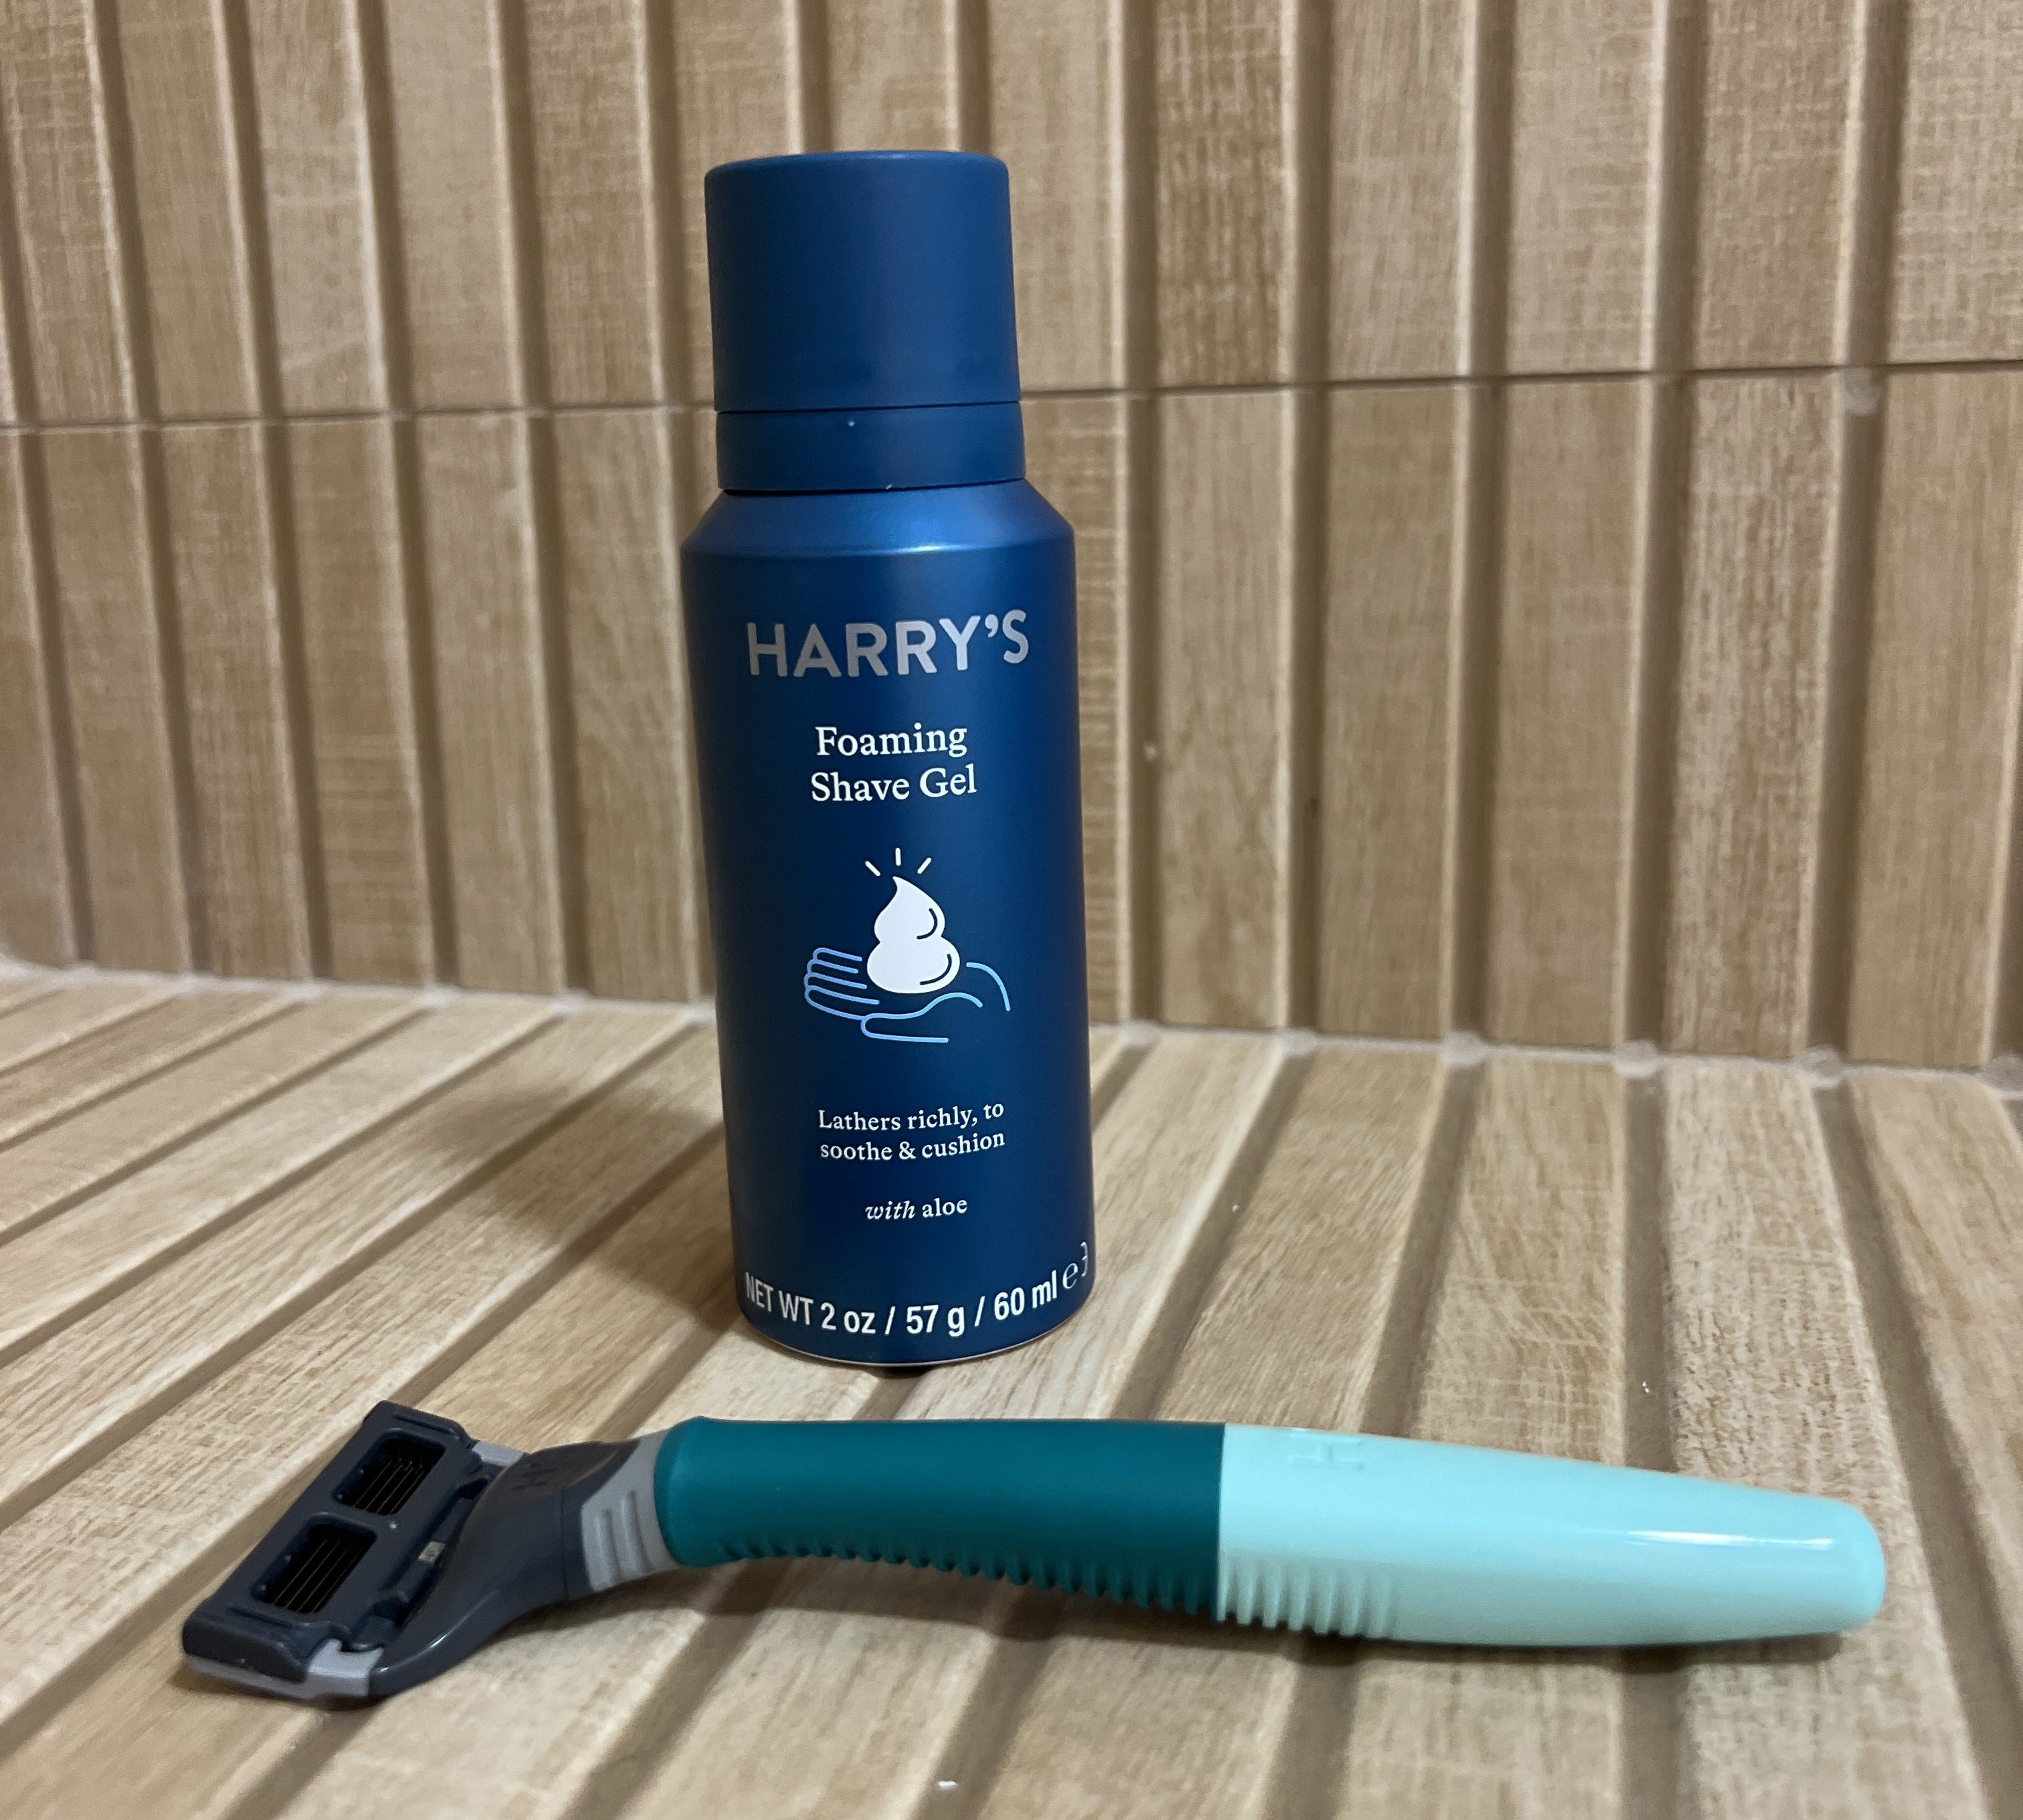 Why Harry’s Is The Only Brand I’ll Buy for My Boyfriend